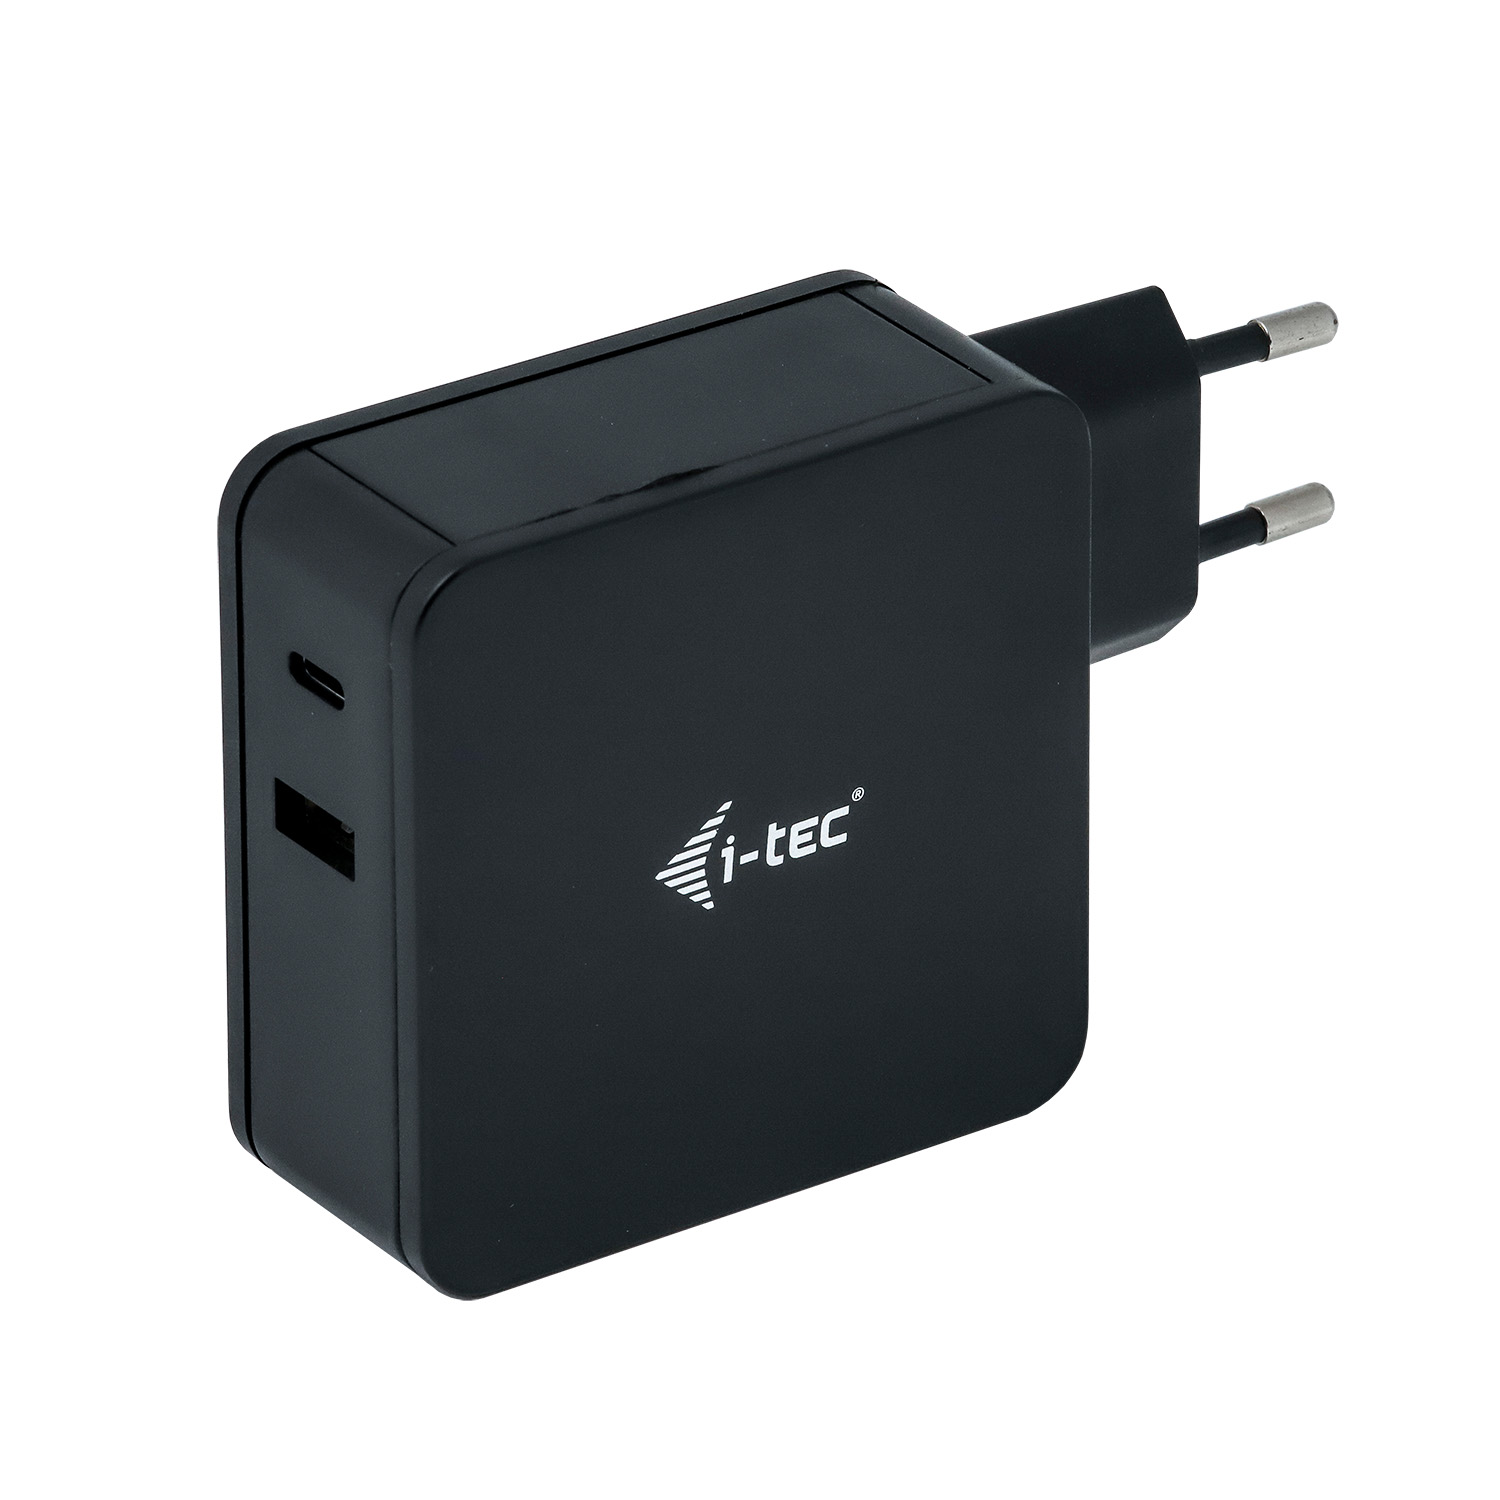 CHARGER-C60WPLUS Charger, I-TEC Schwarz